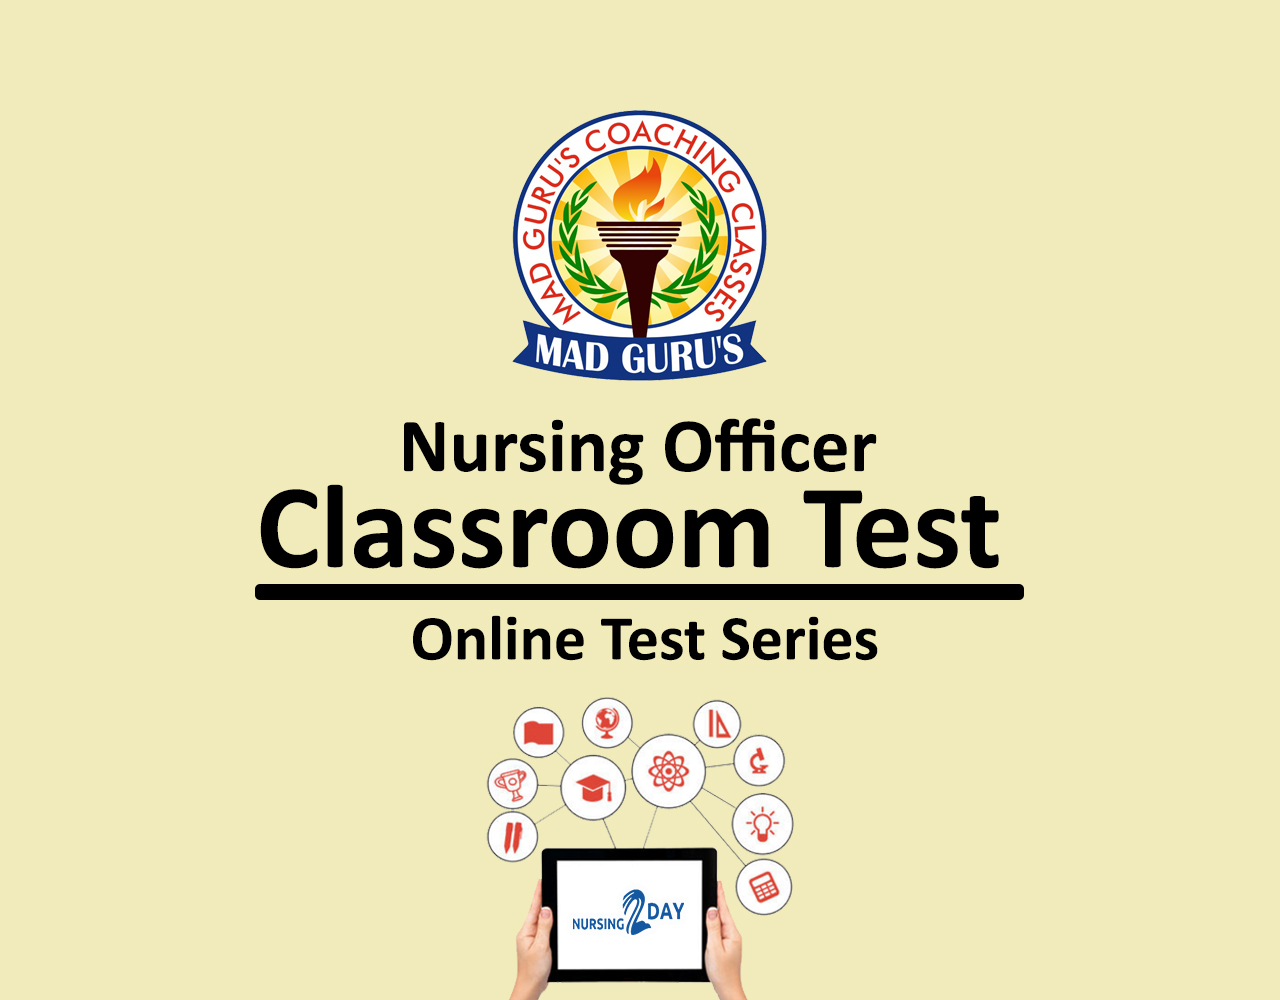 Live Test Series For Norcet 2022